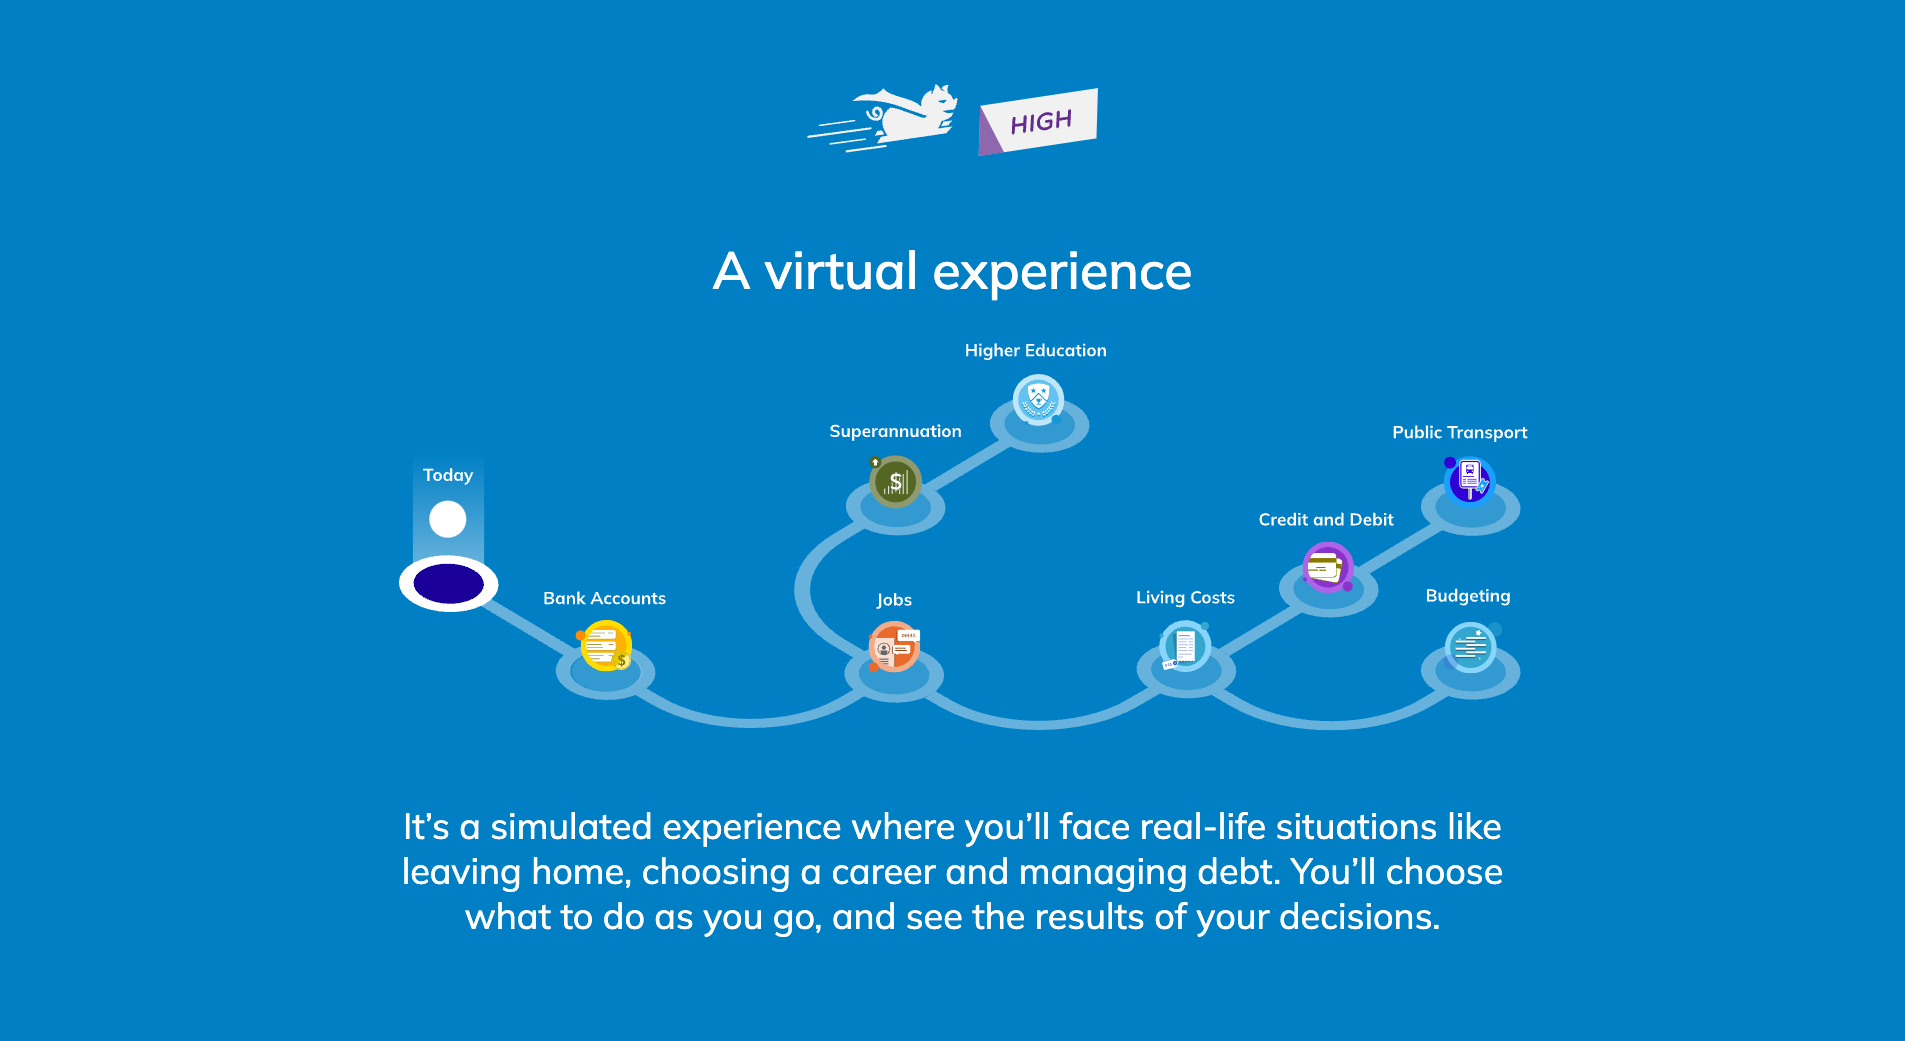 image from the senior dashboard which depicts the student learning journey